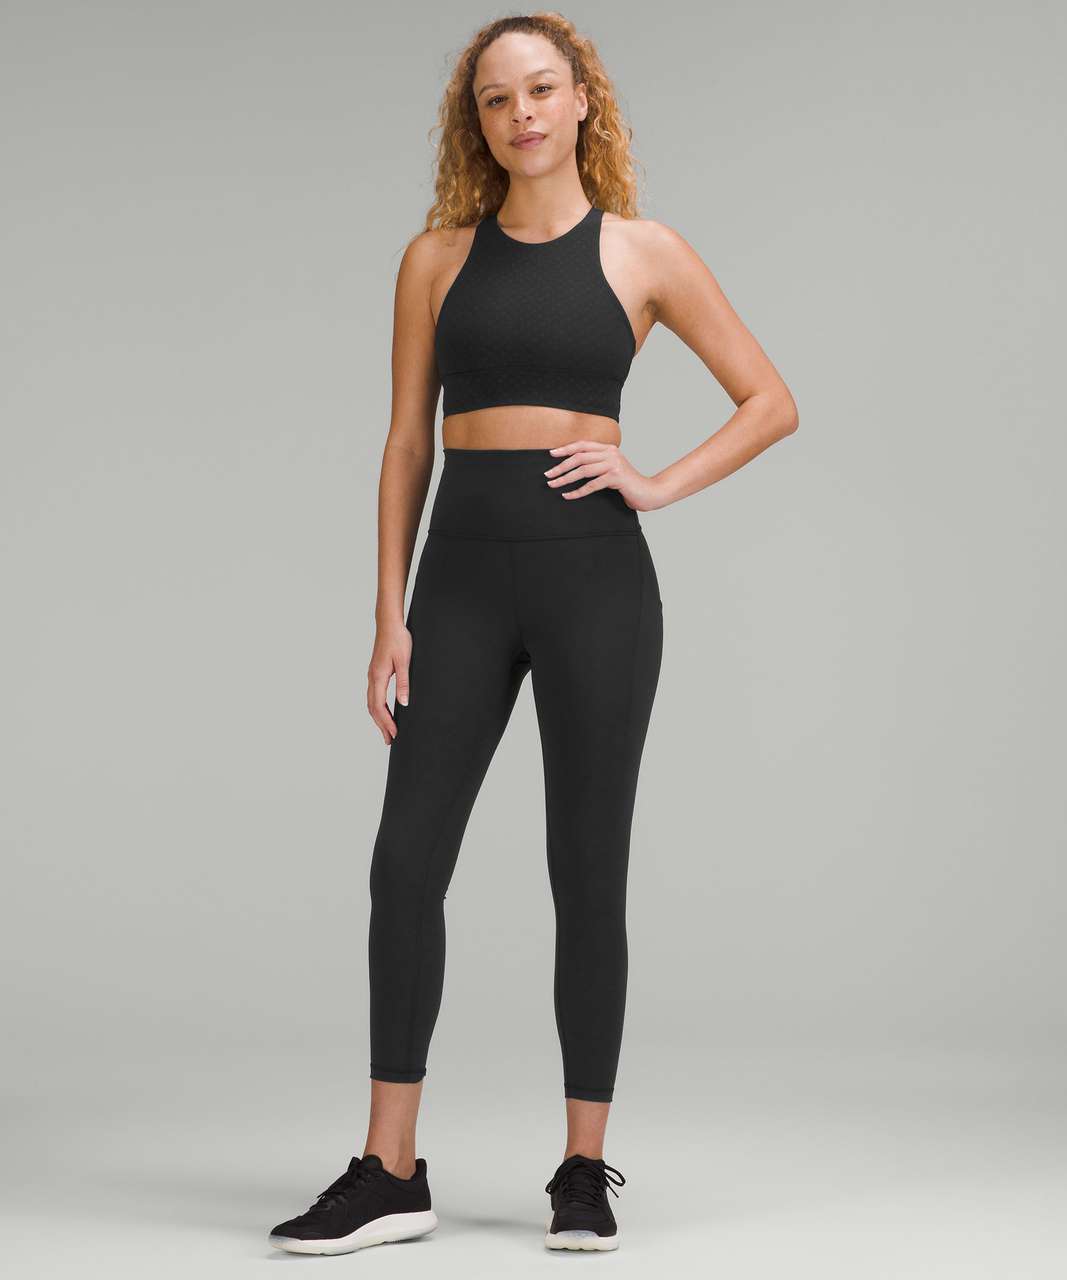 Lululemon Wunder Train High-Rise Tight with Pockets 25" - Black